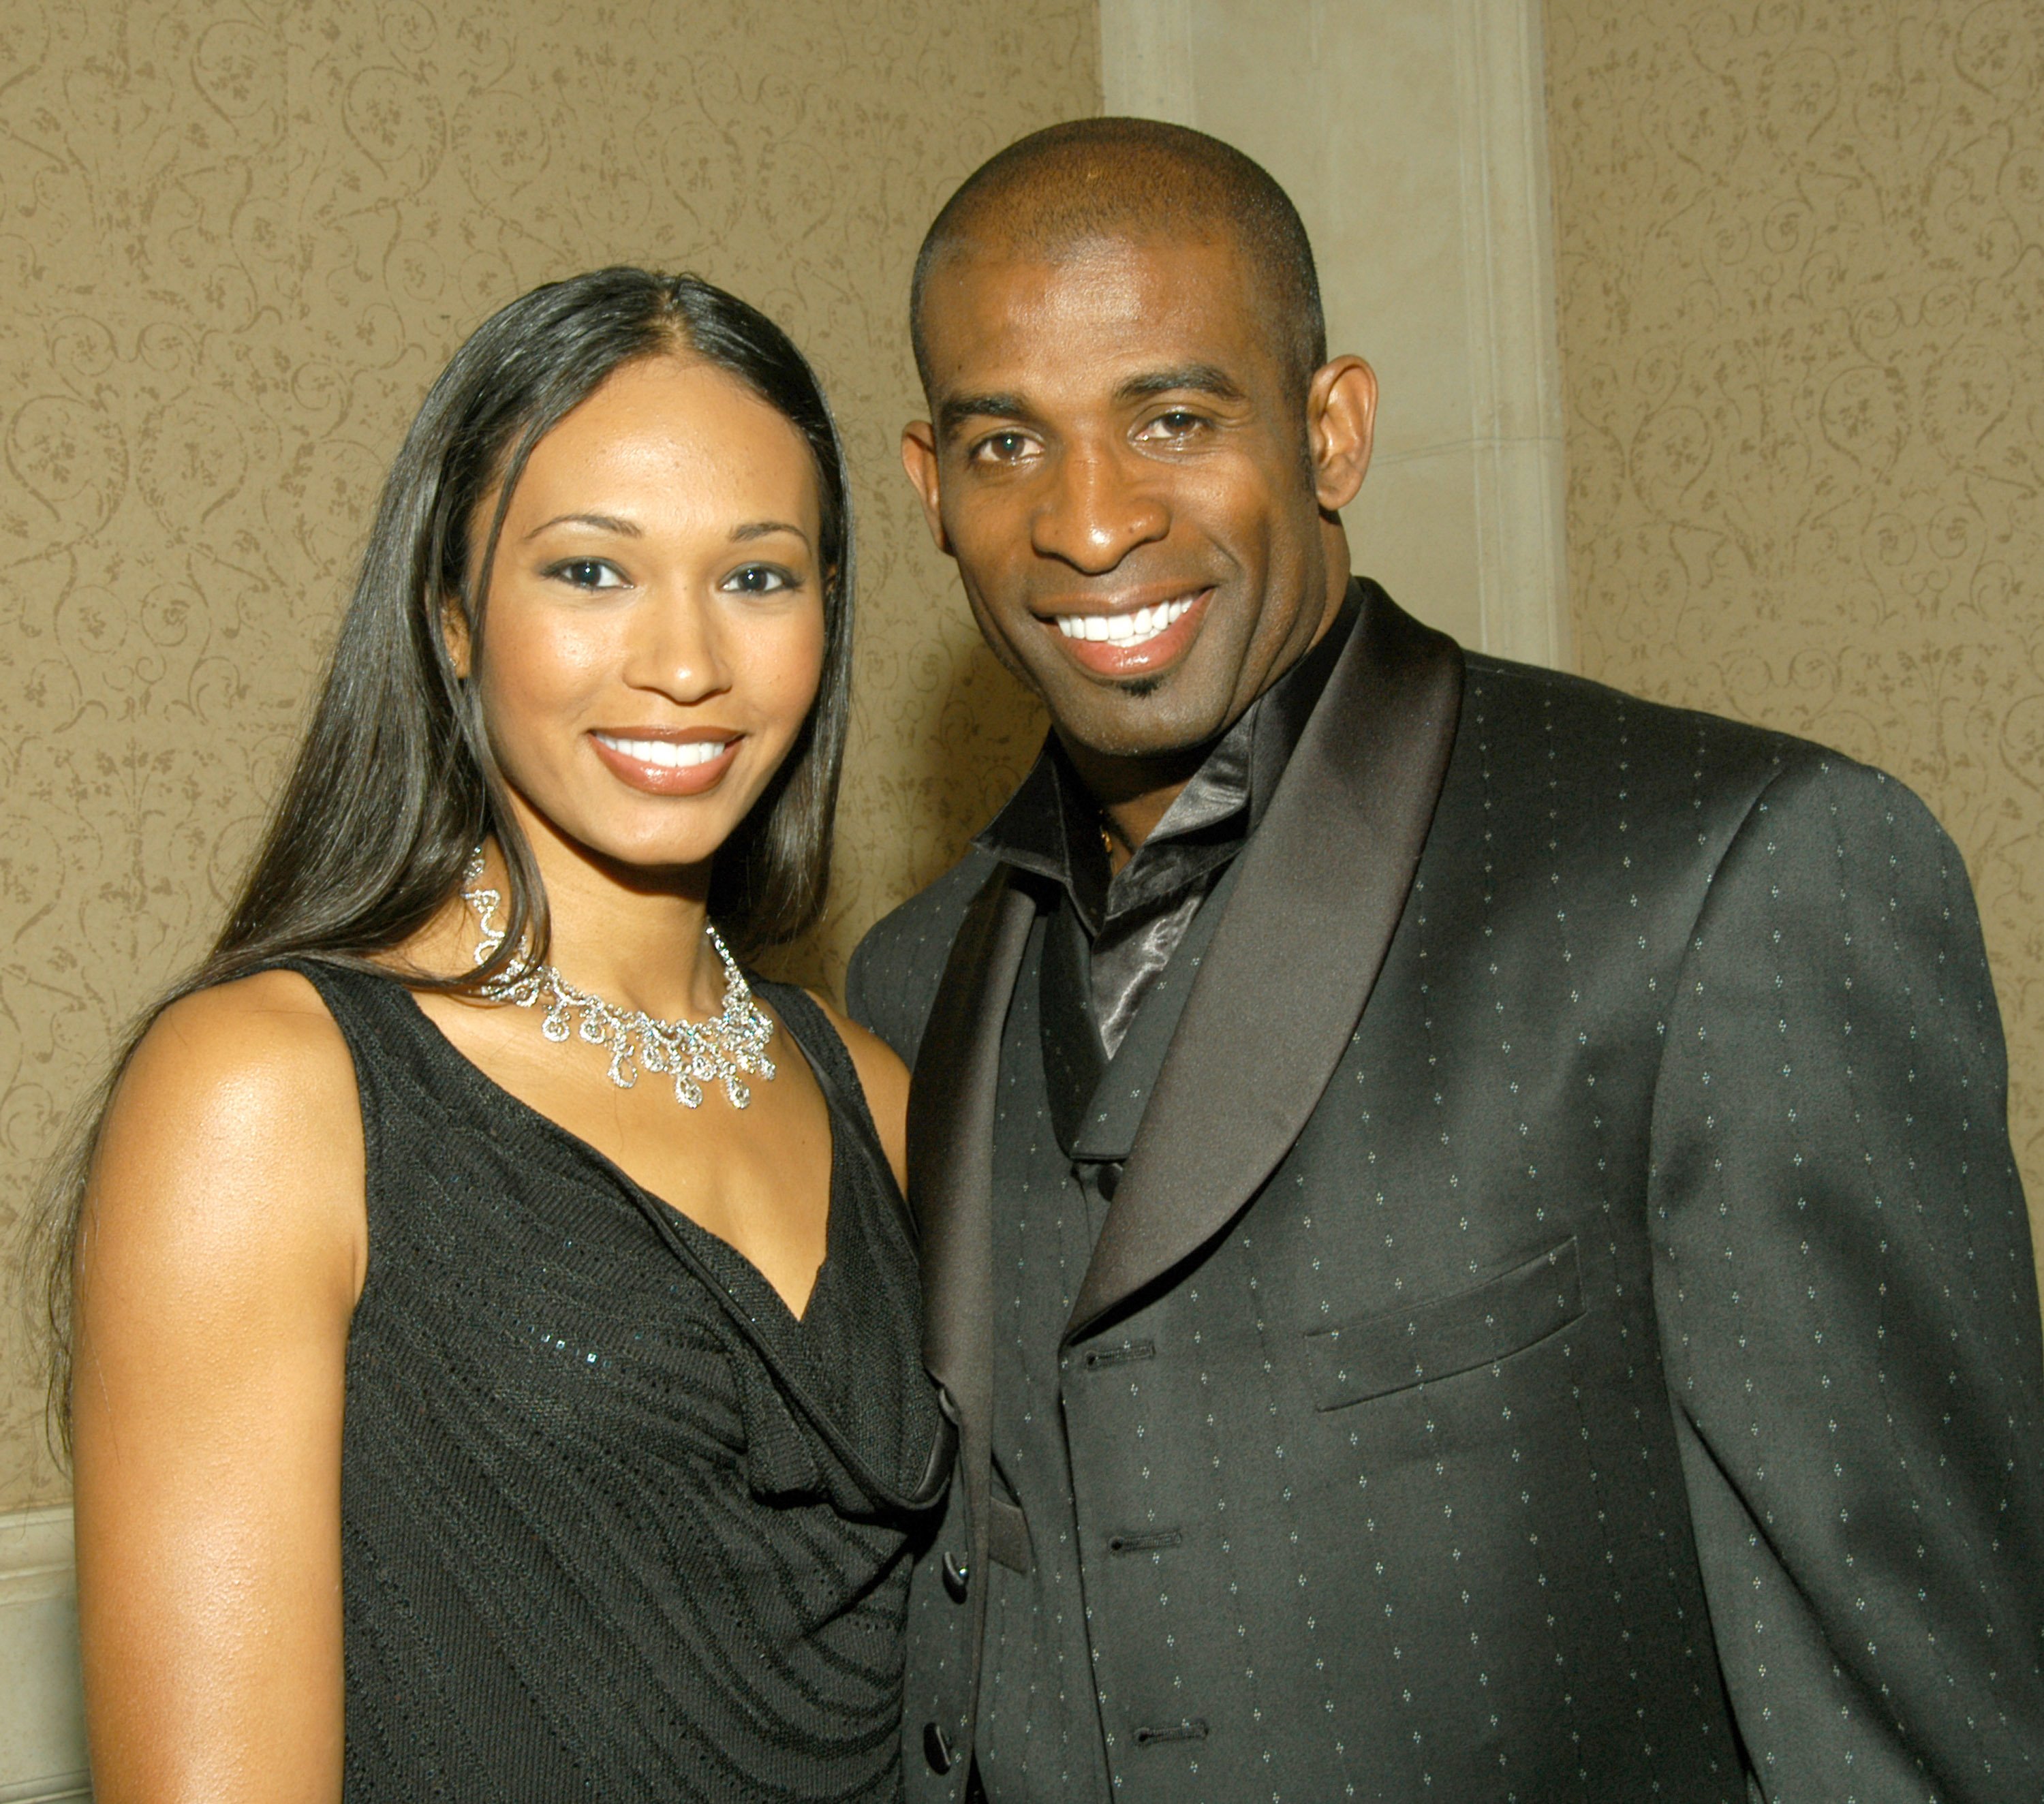 Deion Sanders and Pilar Sanders at the Rick Weiss Humanitarian Awards Gala in California on May 3, 2003 | Source: Getty Images